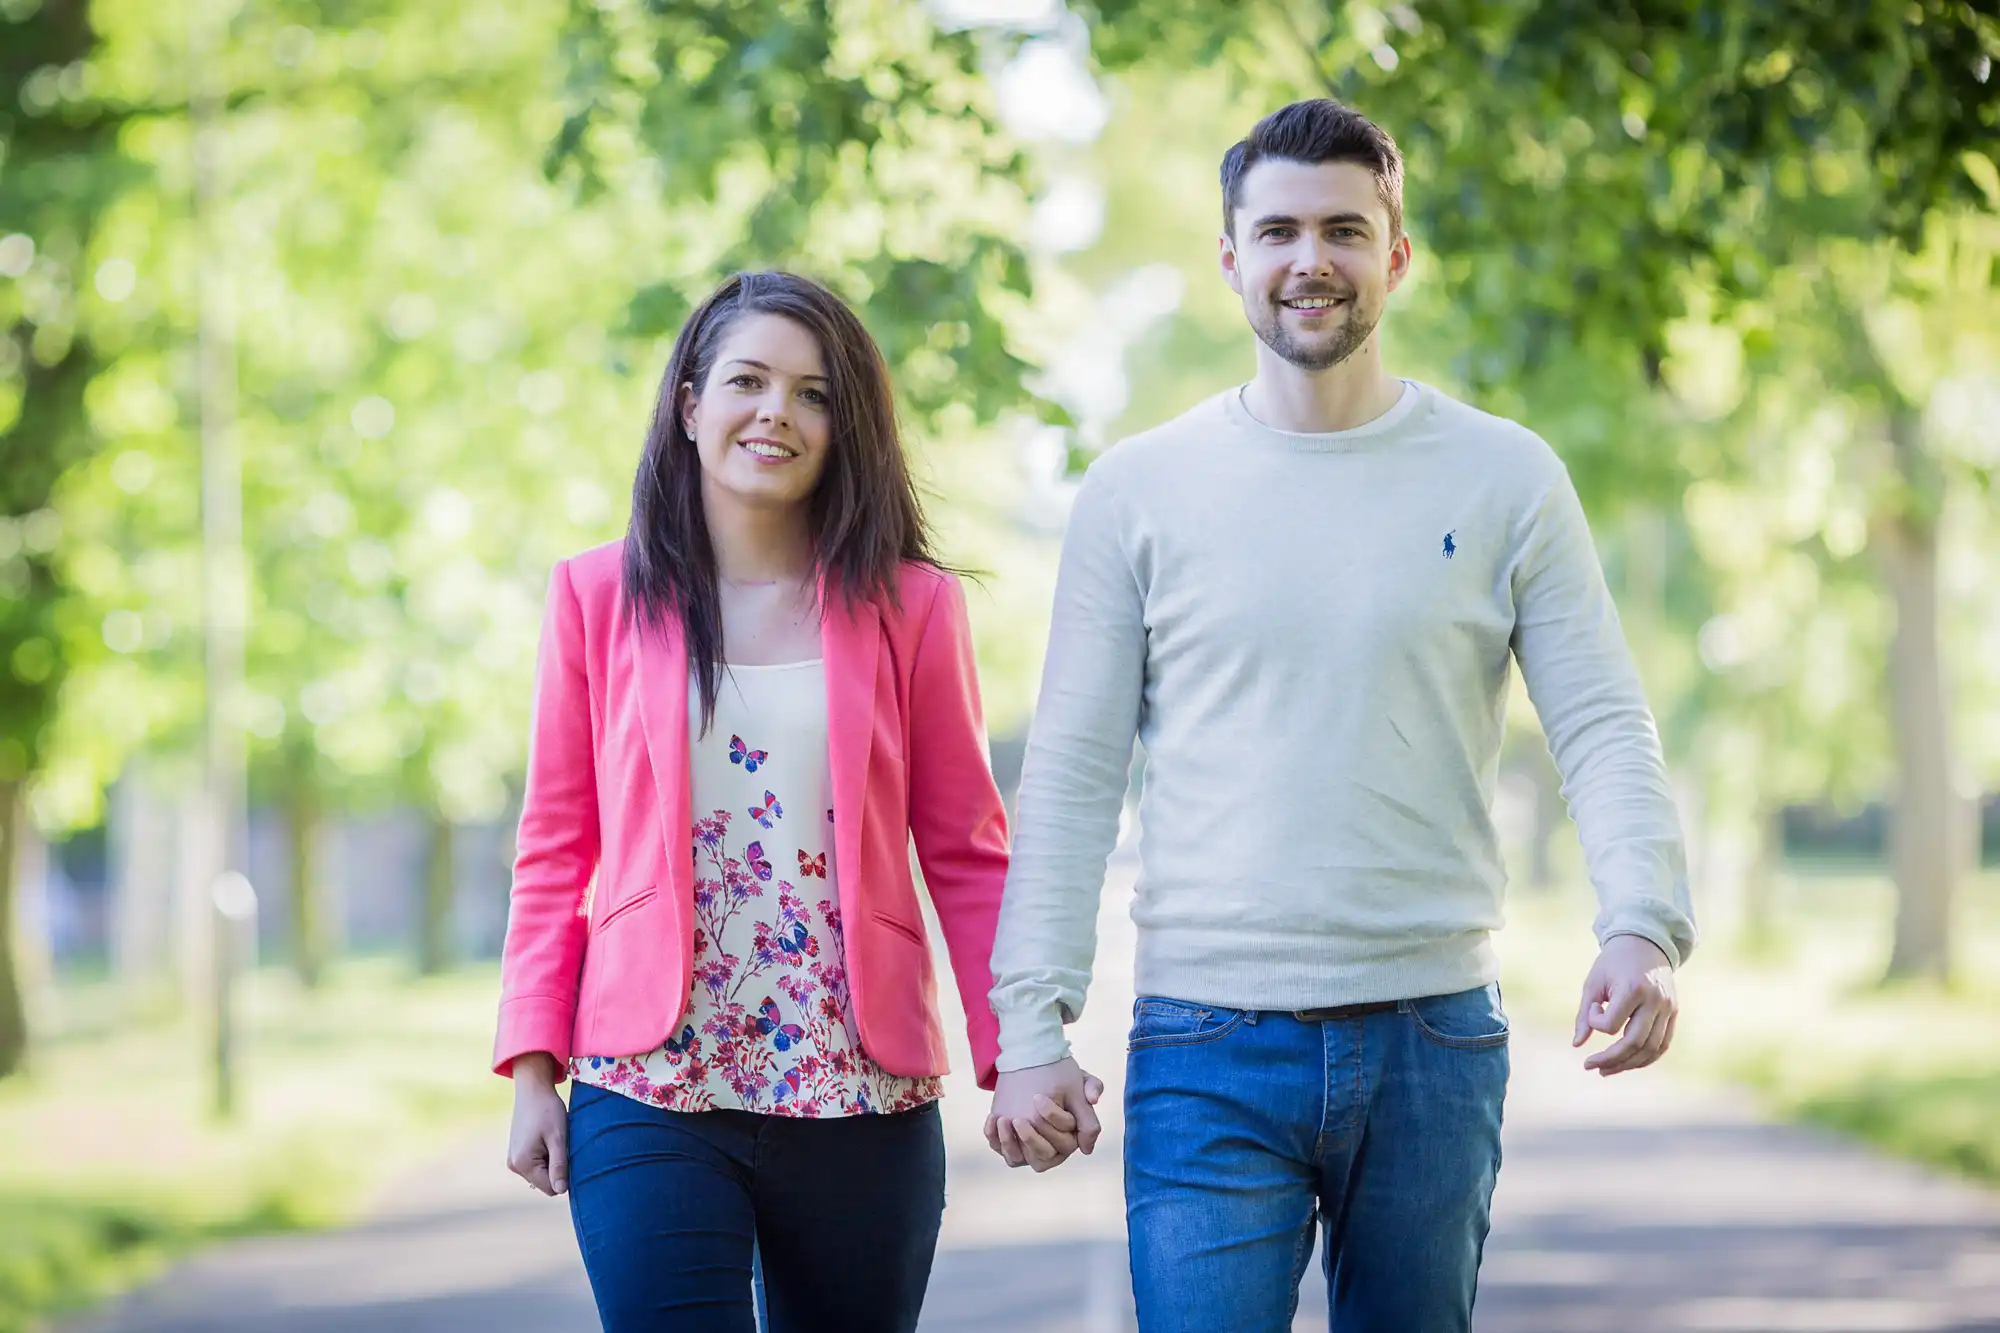 A young man and woman holding hands and smiling while walking down a tree-lined path.